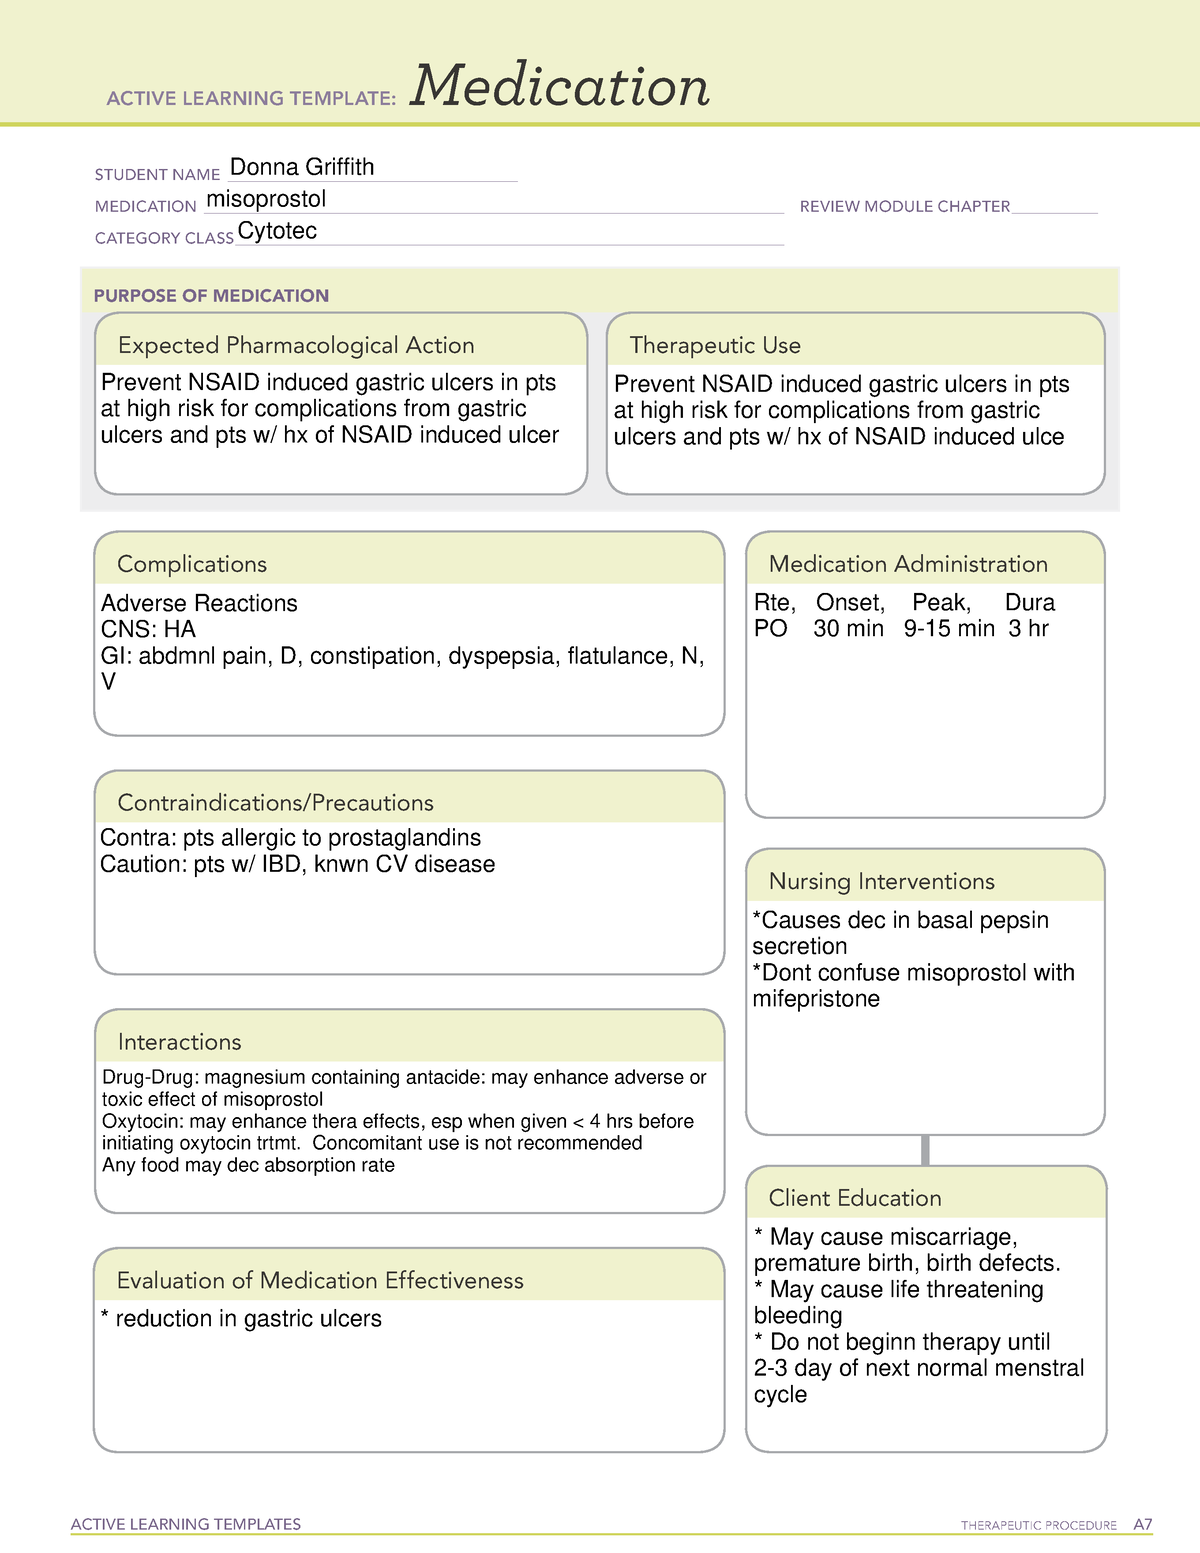 02 misoprostol med template ACTIVE LEARNING TEMPLATES THERAPEUTIC